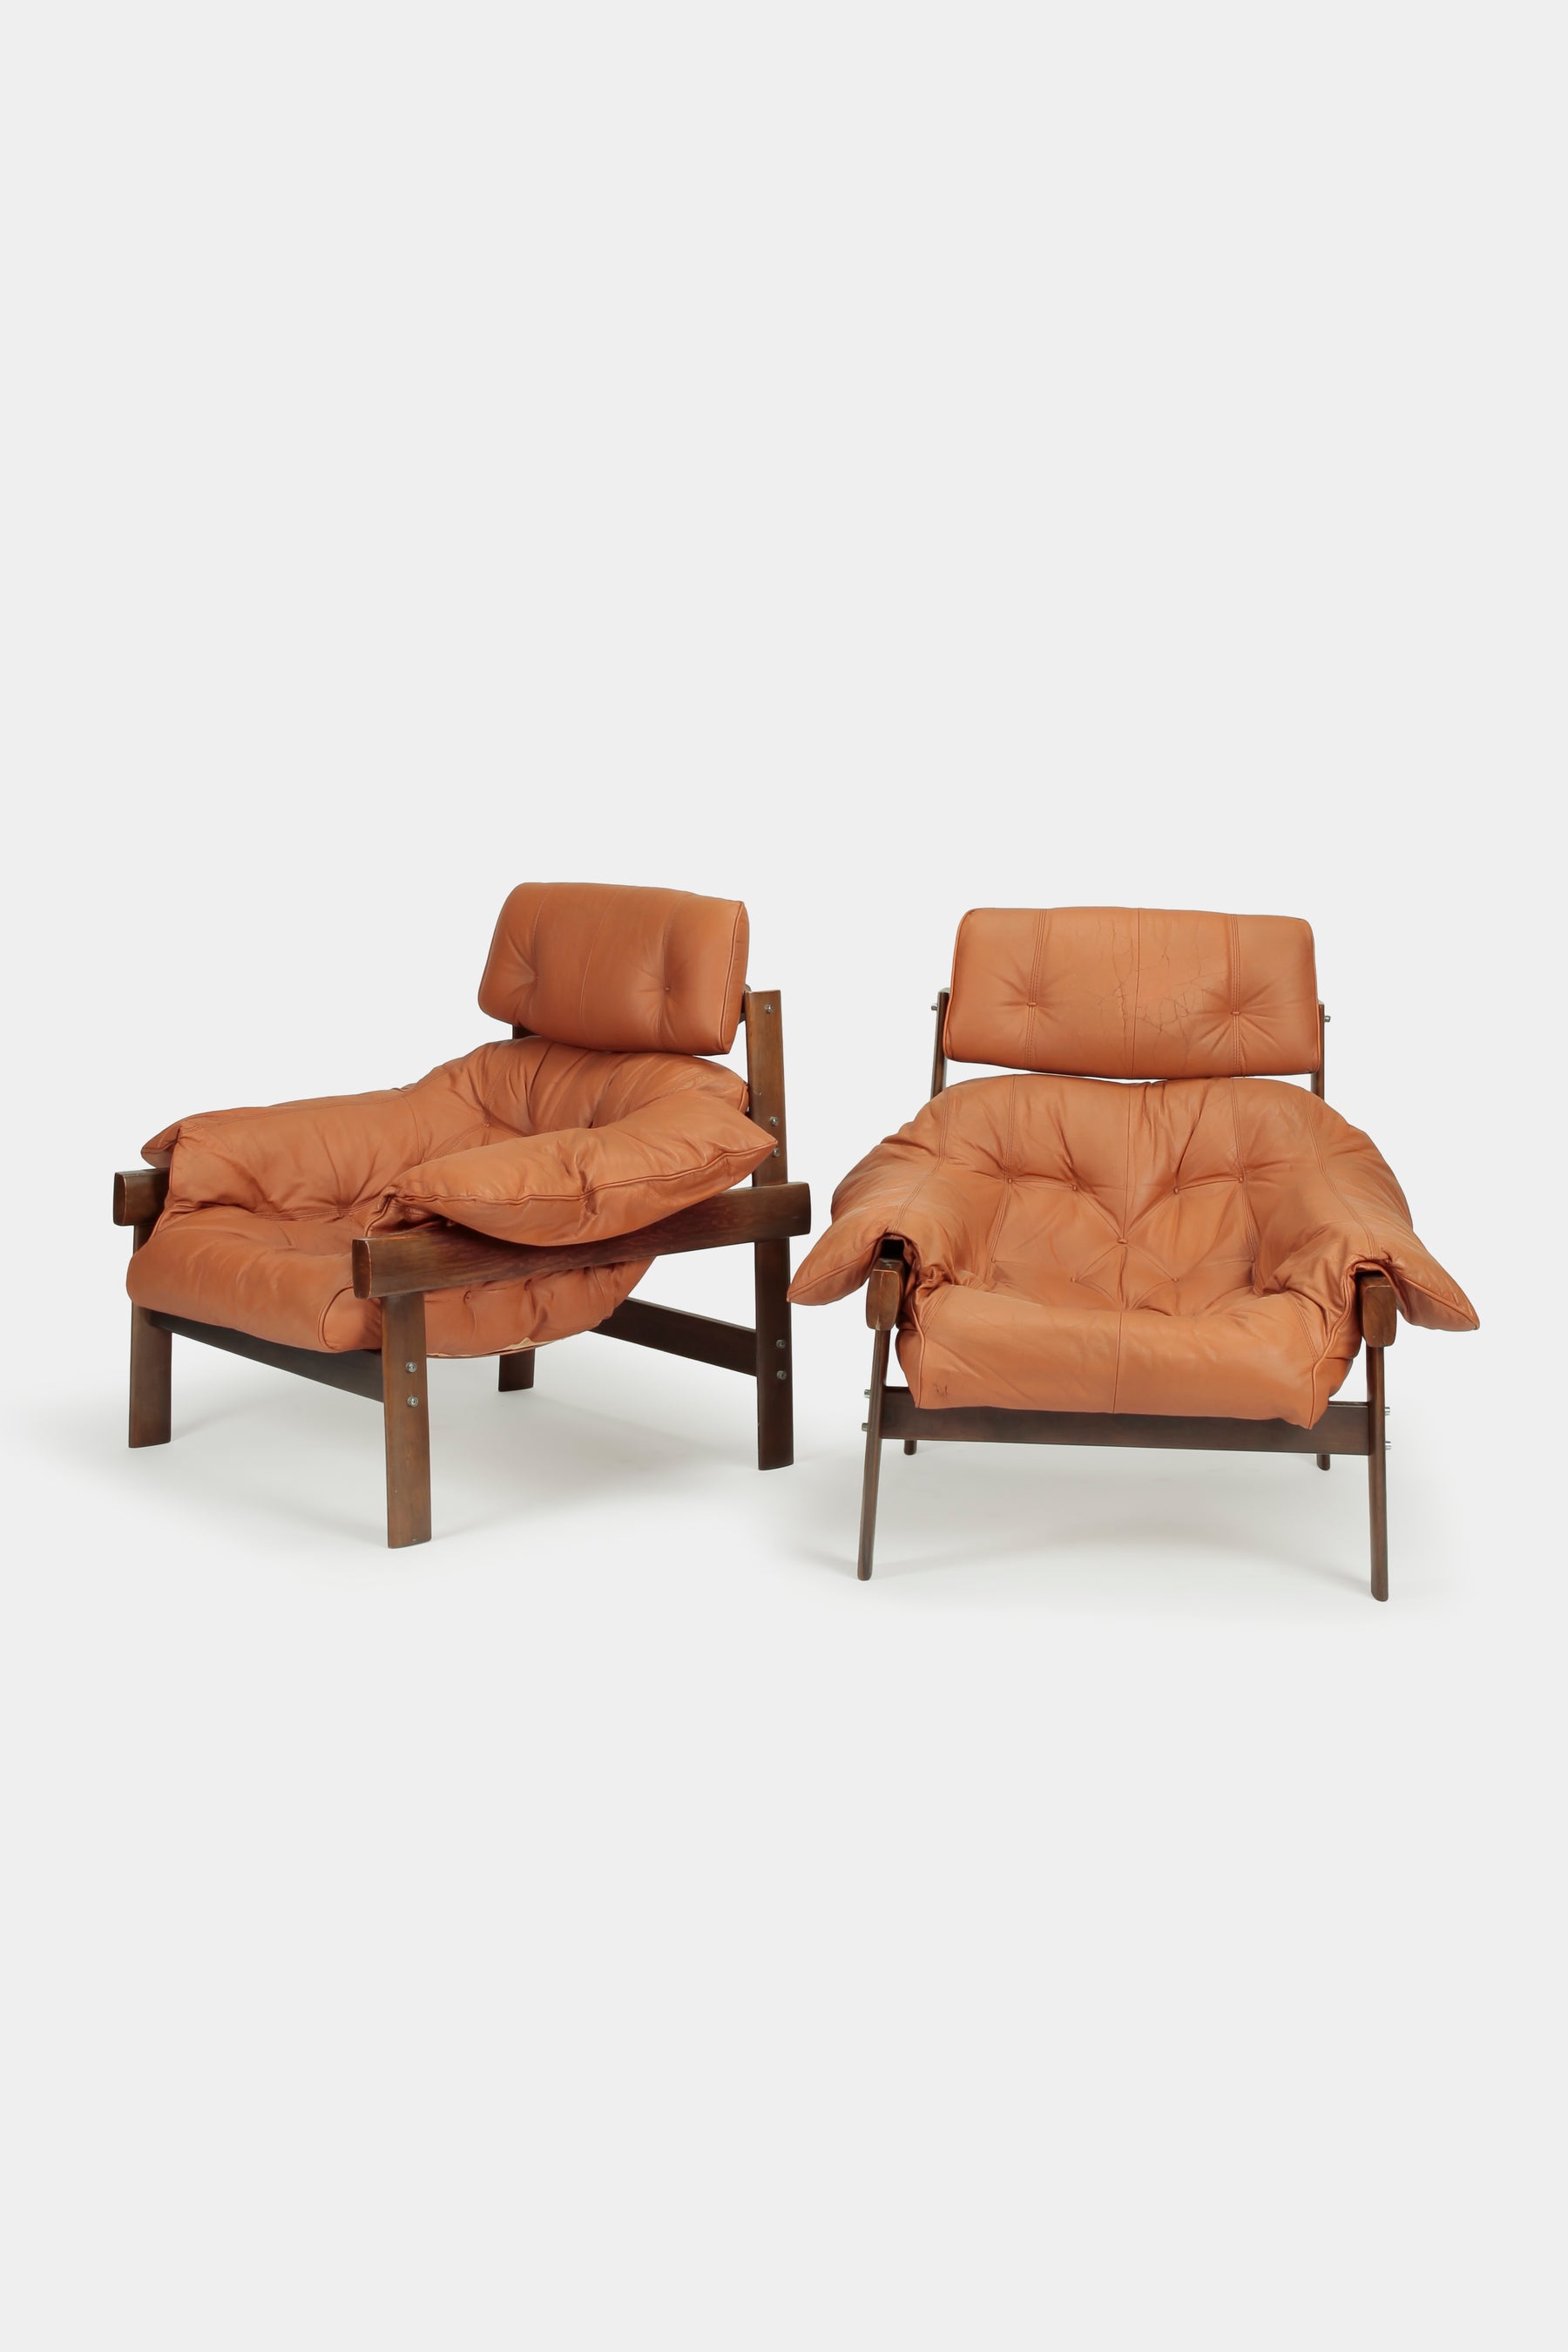 A pair of Parcival Lafer Lounge Chairs 60'